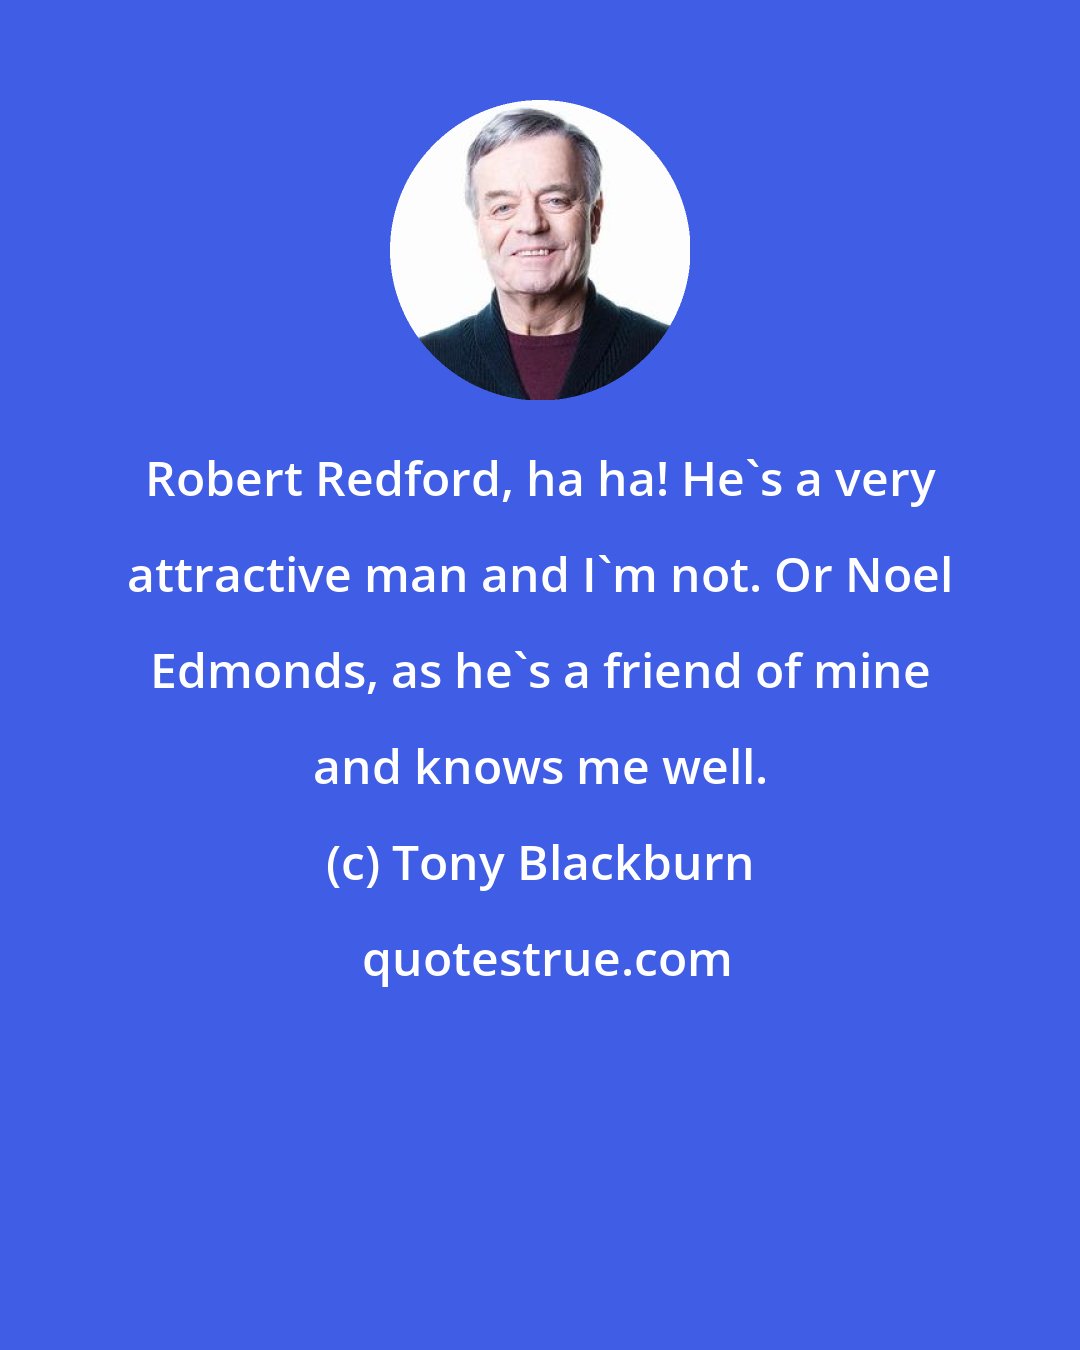 Tony Blackburn: Robert Redford, ha ha! He's a very attractive man and I'm not. Or Noel Edmonds, as he's a friend of mine and knows me well.